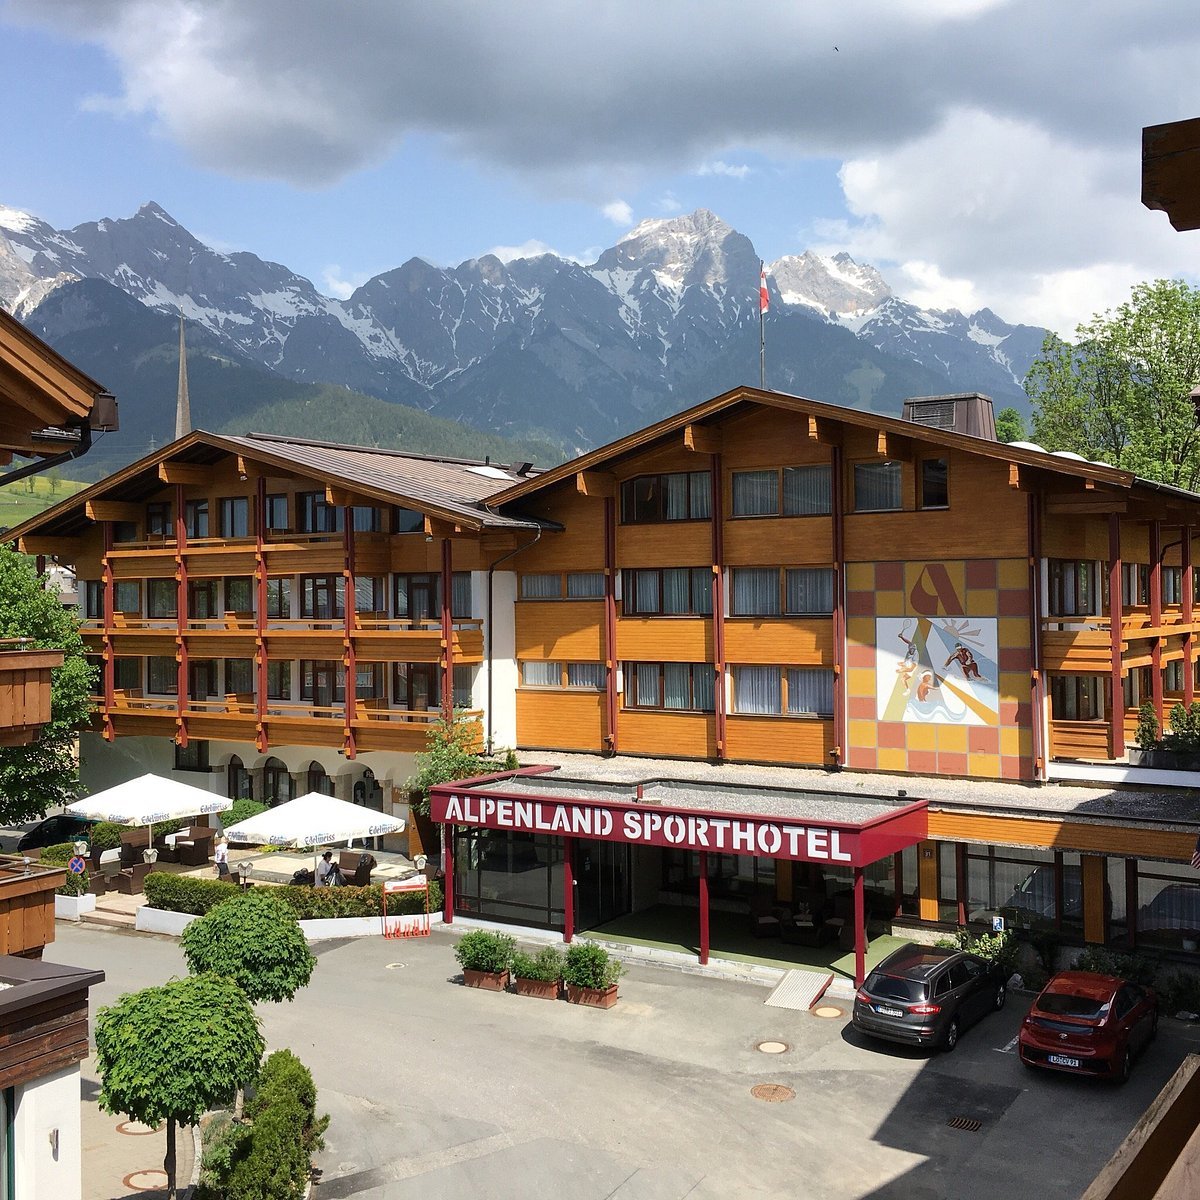 Alpenland Sporthotel front view